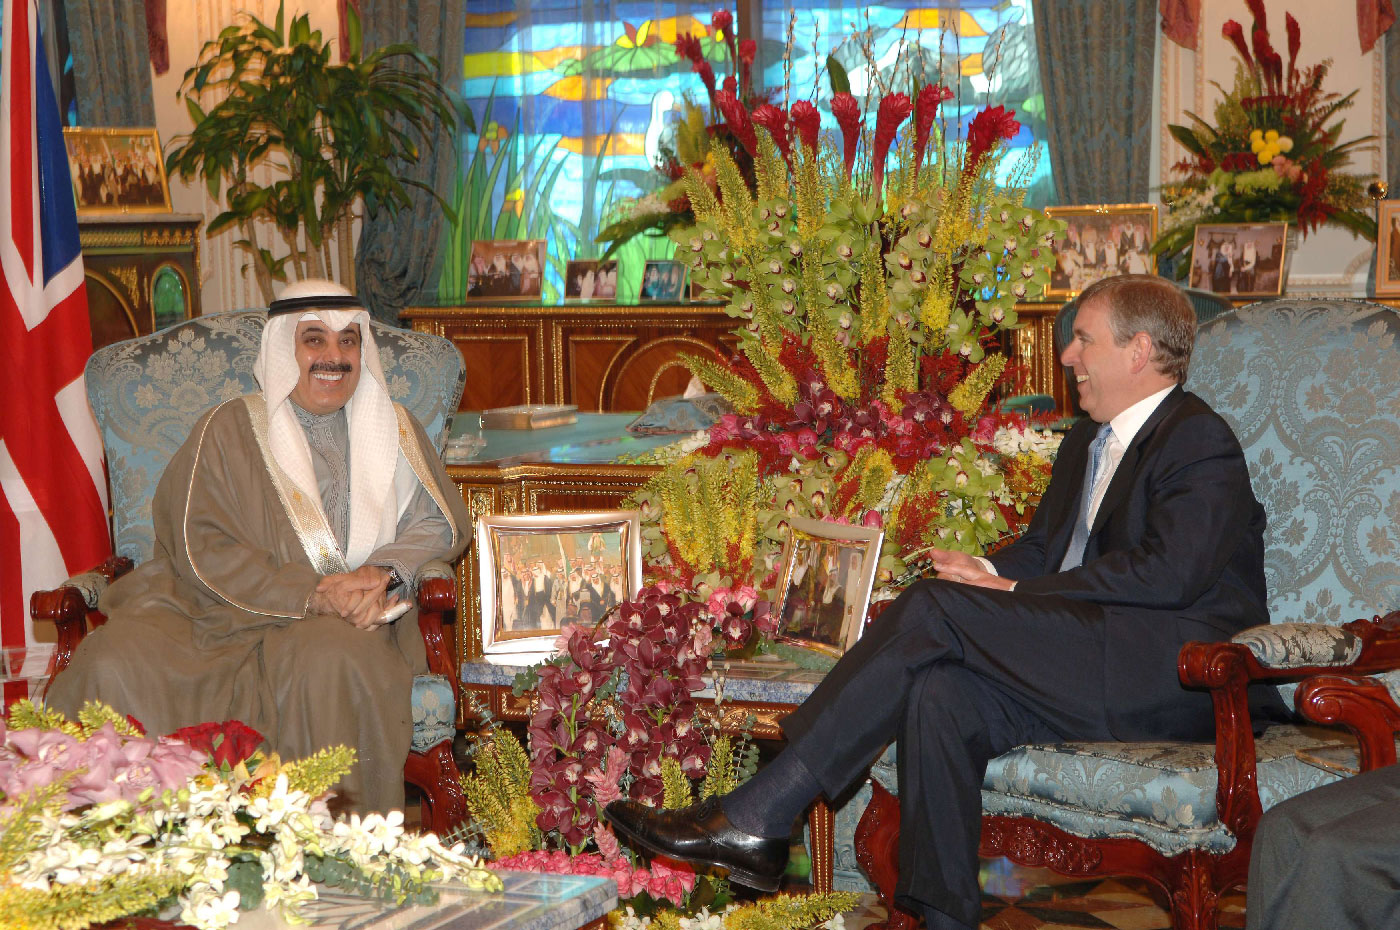 Maan al-Sanea, the owner of Saudi business Saad Group and Saad Specialist Hospital, meets with Prince Andrew, a member of the British royal family, Saudi Arabia, March 12, 2007.